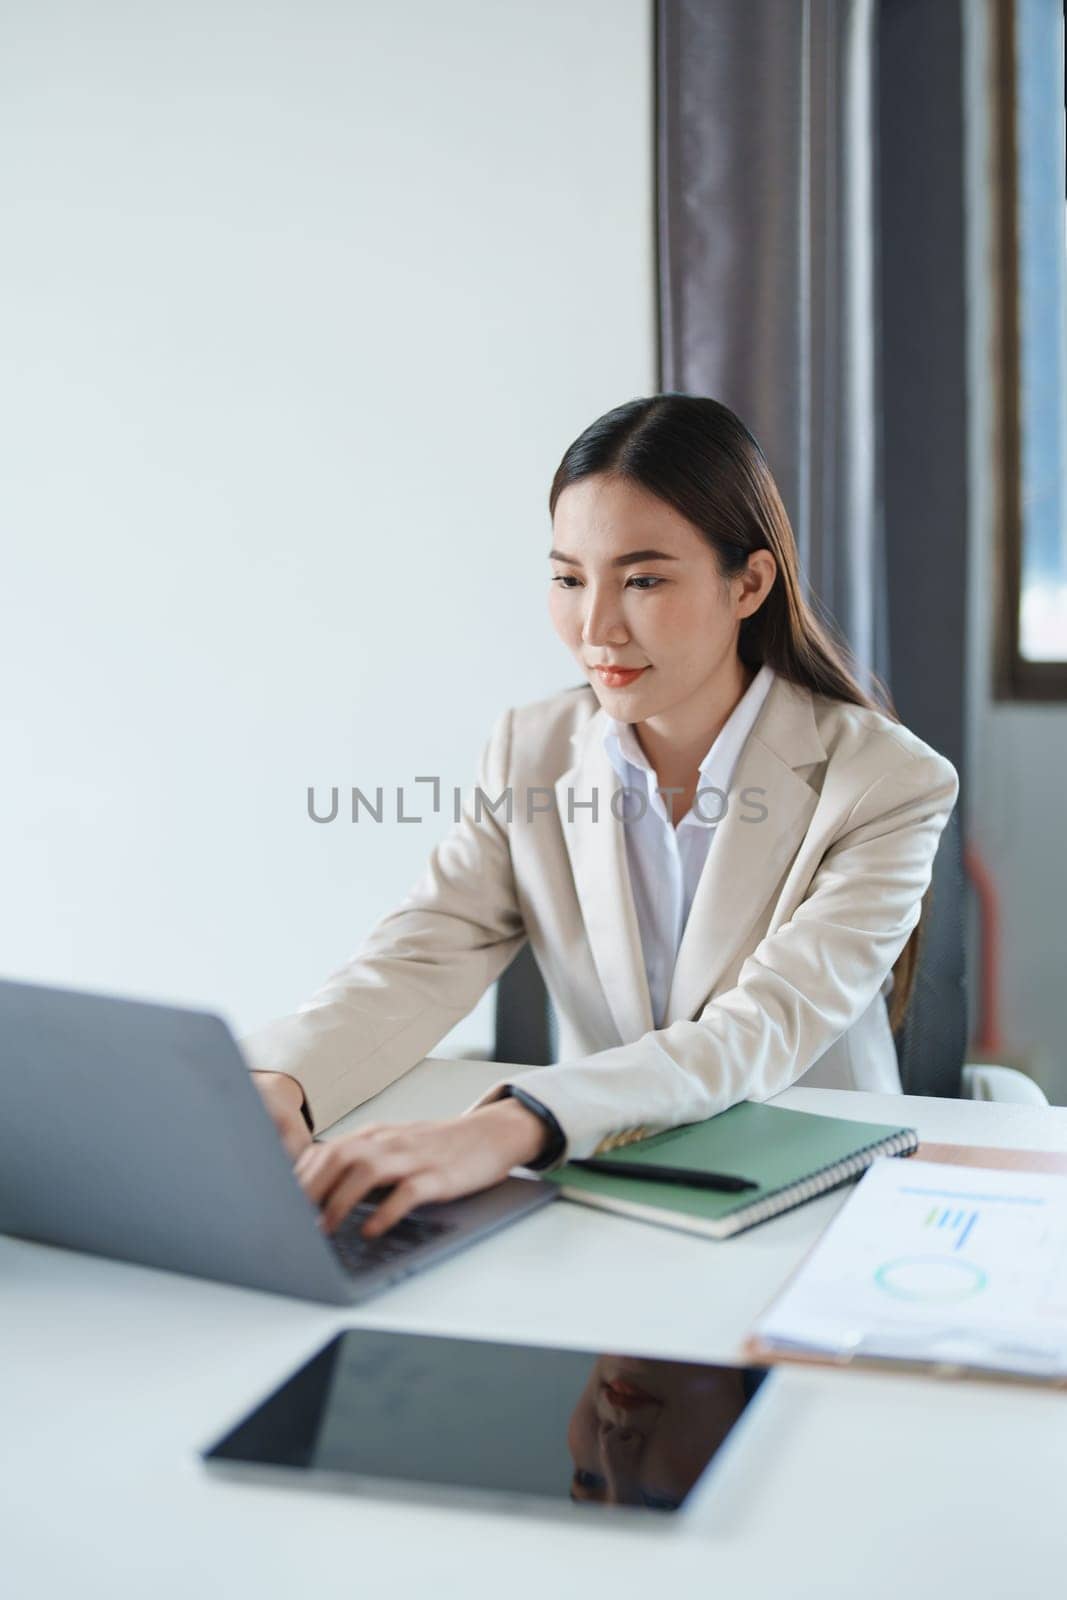 Portrait of a young Asian woman showing a smiling face as she using computer and financial documents on her desk in the early morning hours.